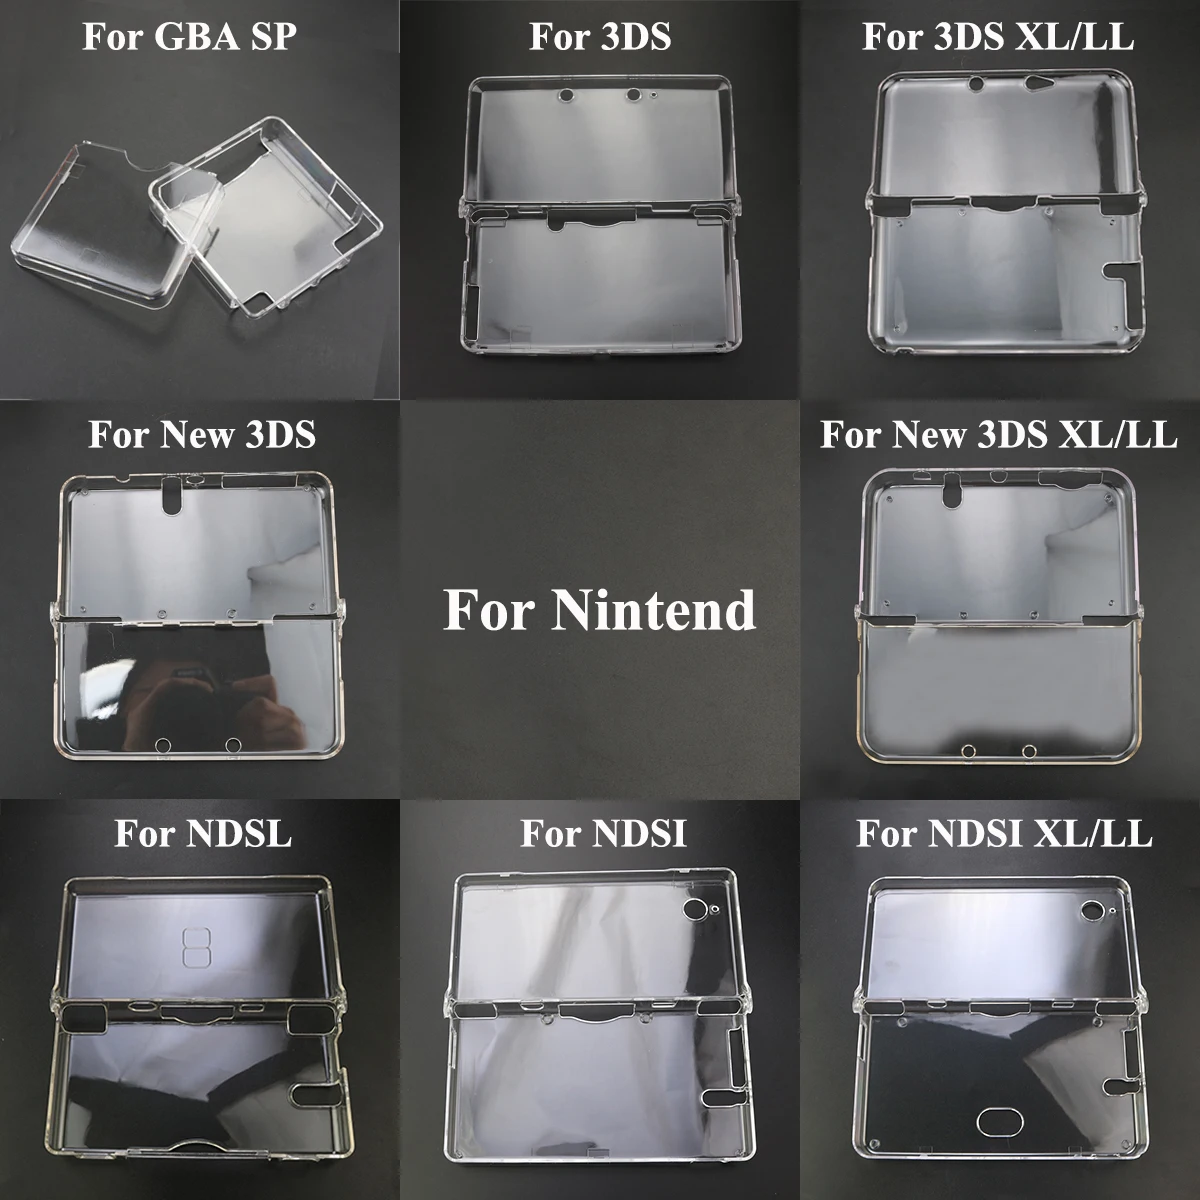 

YuXi 1PCS Plastic Clear Crystal Case Cover Protective Shell For Nintend DS Lite NDSL NDSi XL for New 3DS XL LL GBA SP Hard Case